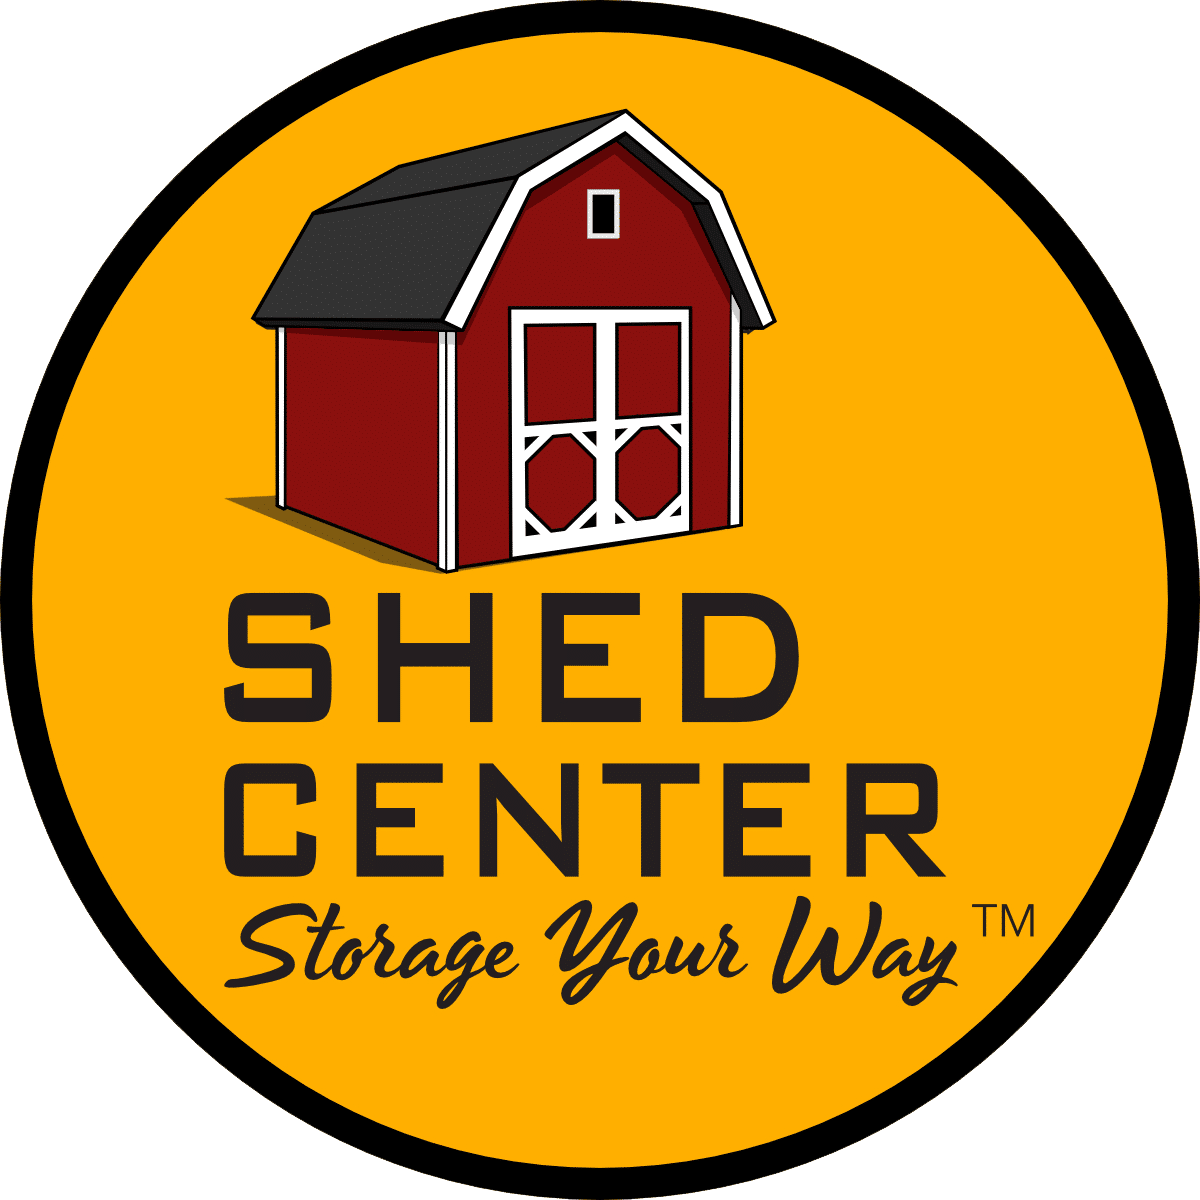 The Shed Center